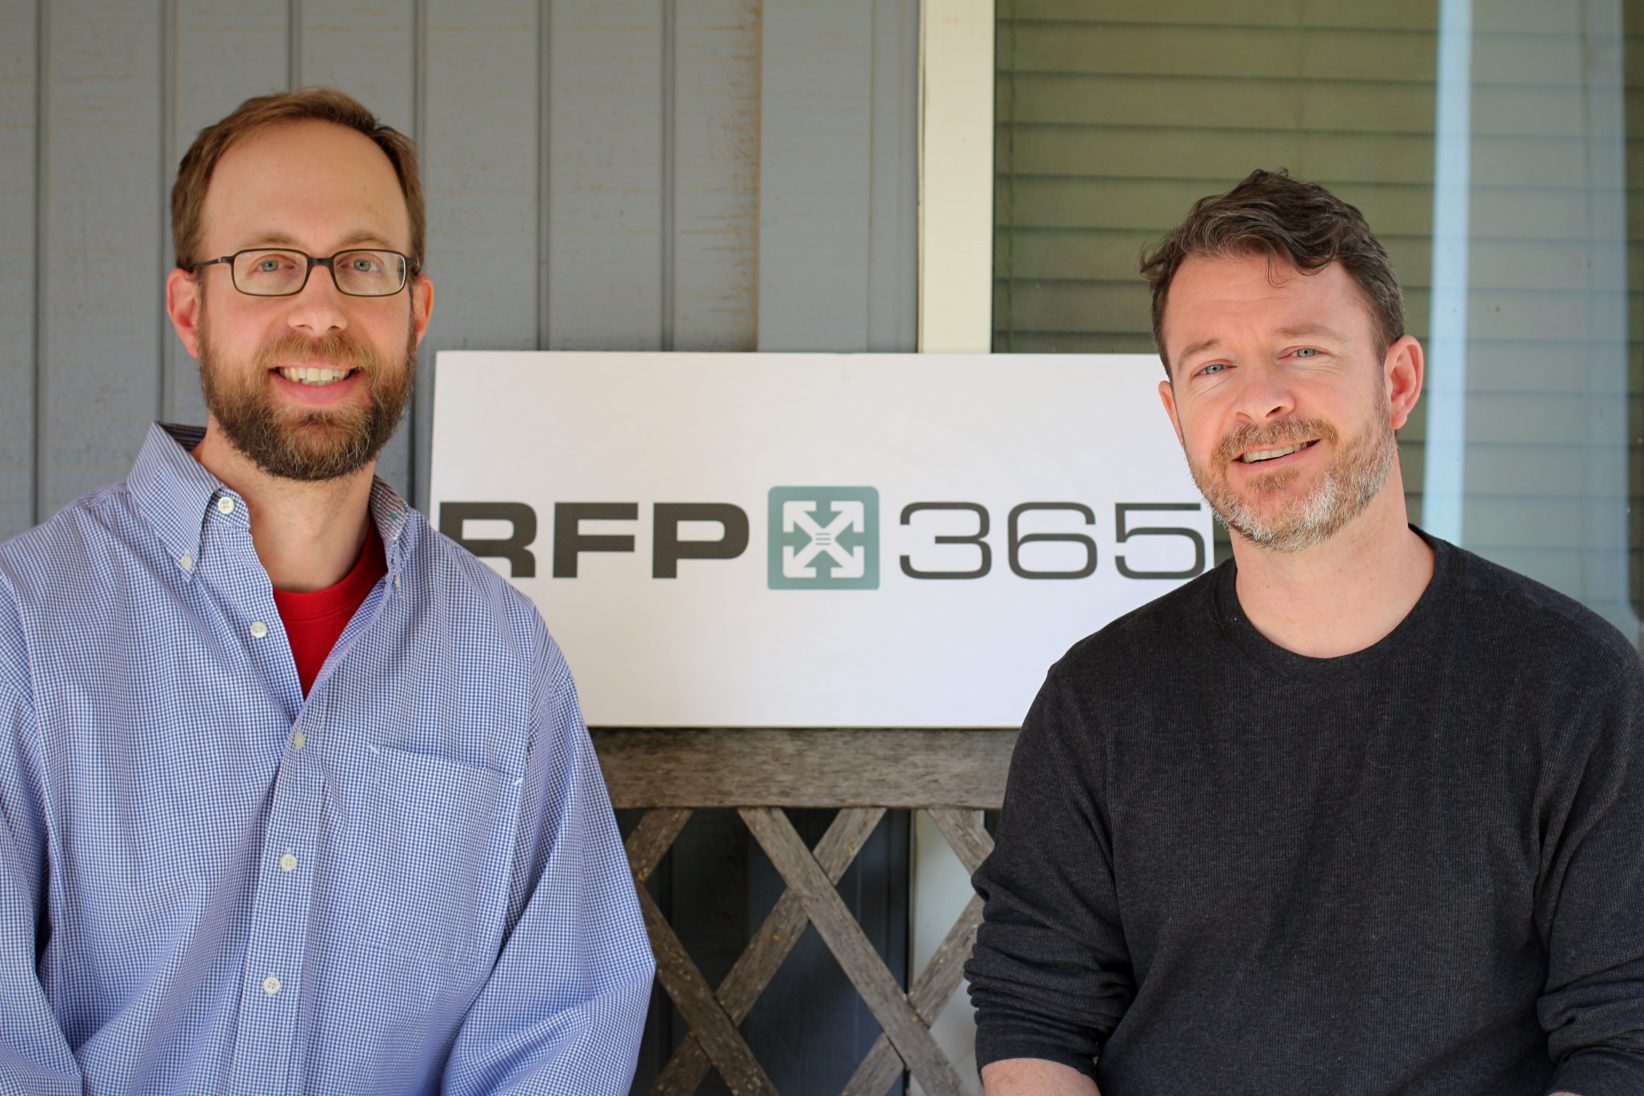 KCK tech firm RFP365 named ‘new small business’ of the year